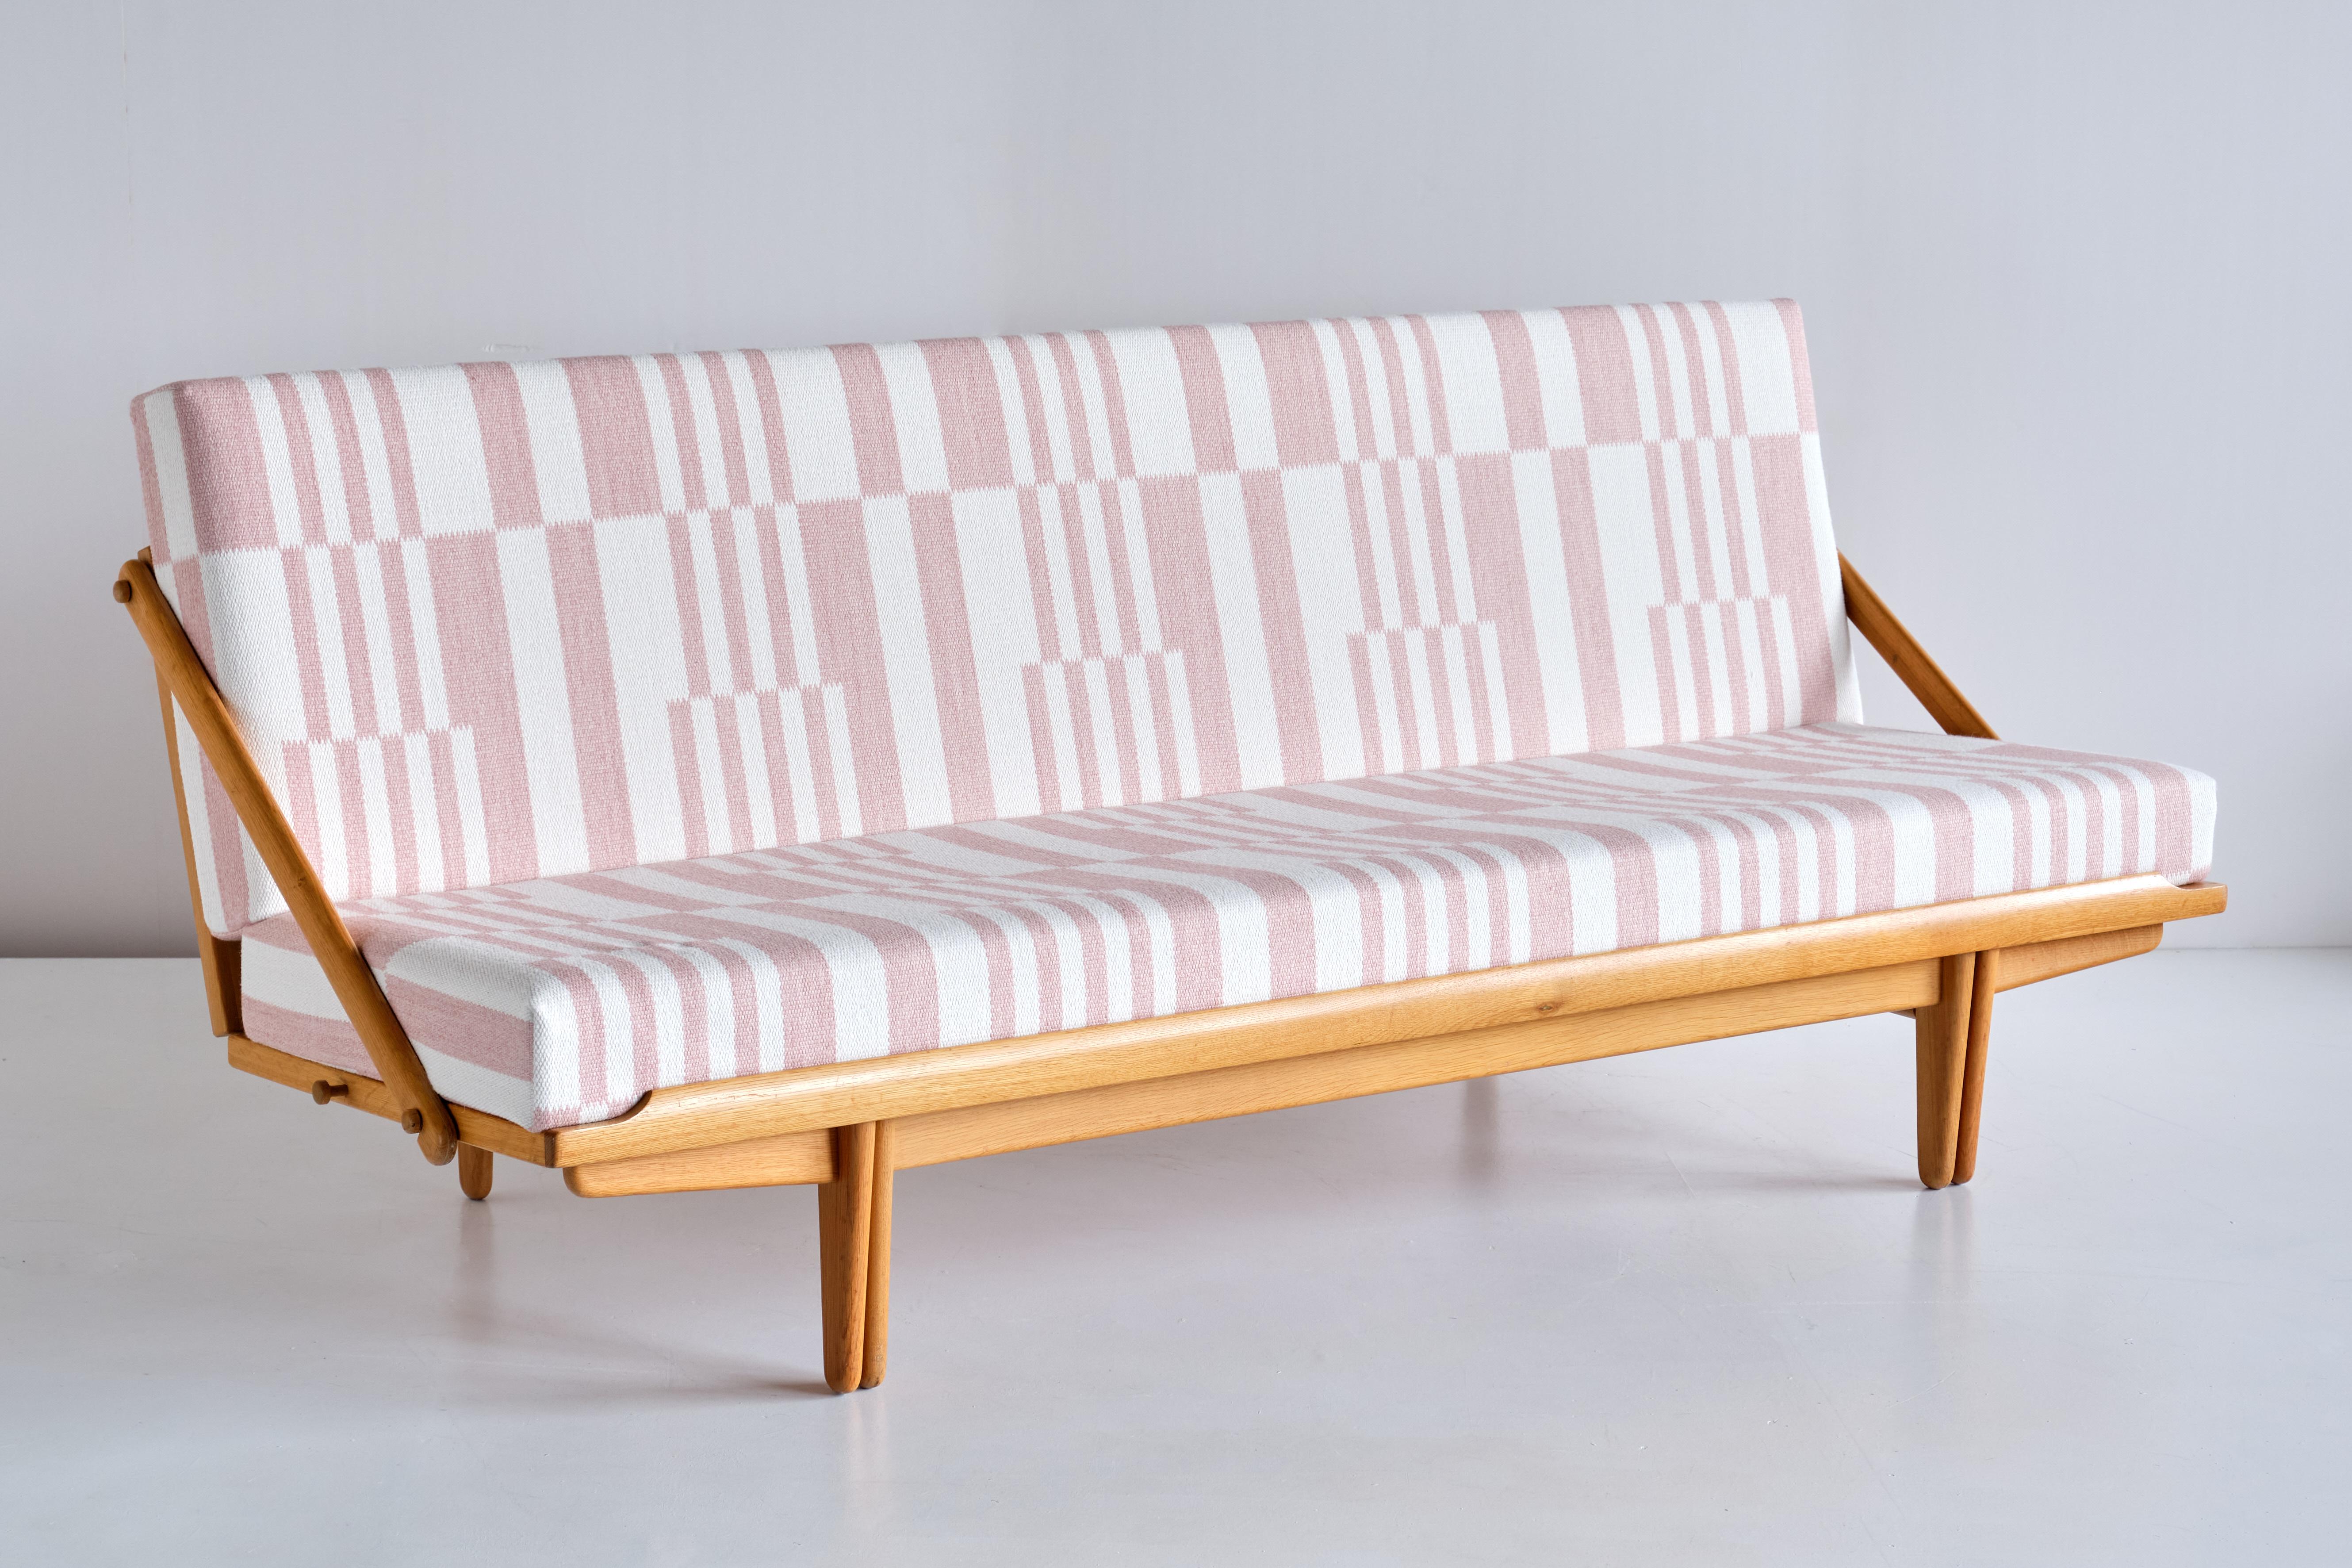 Scandinavian Modern Poul Volther Sofa / Daybed in Oak and Pierre Frey Fabric, Gemla, Sweden, 1955 For Sale